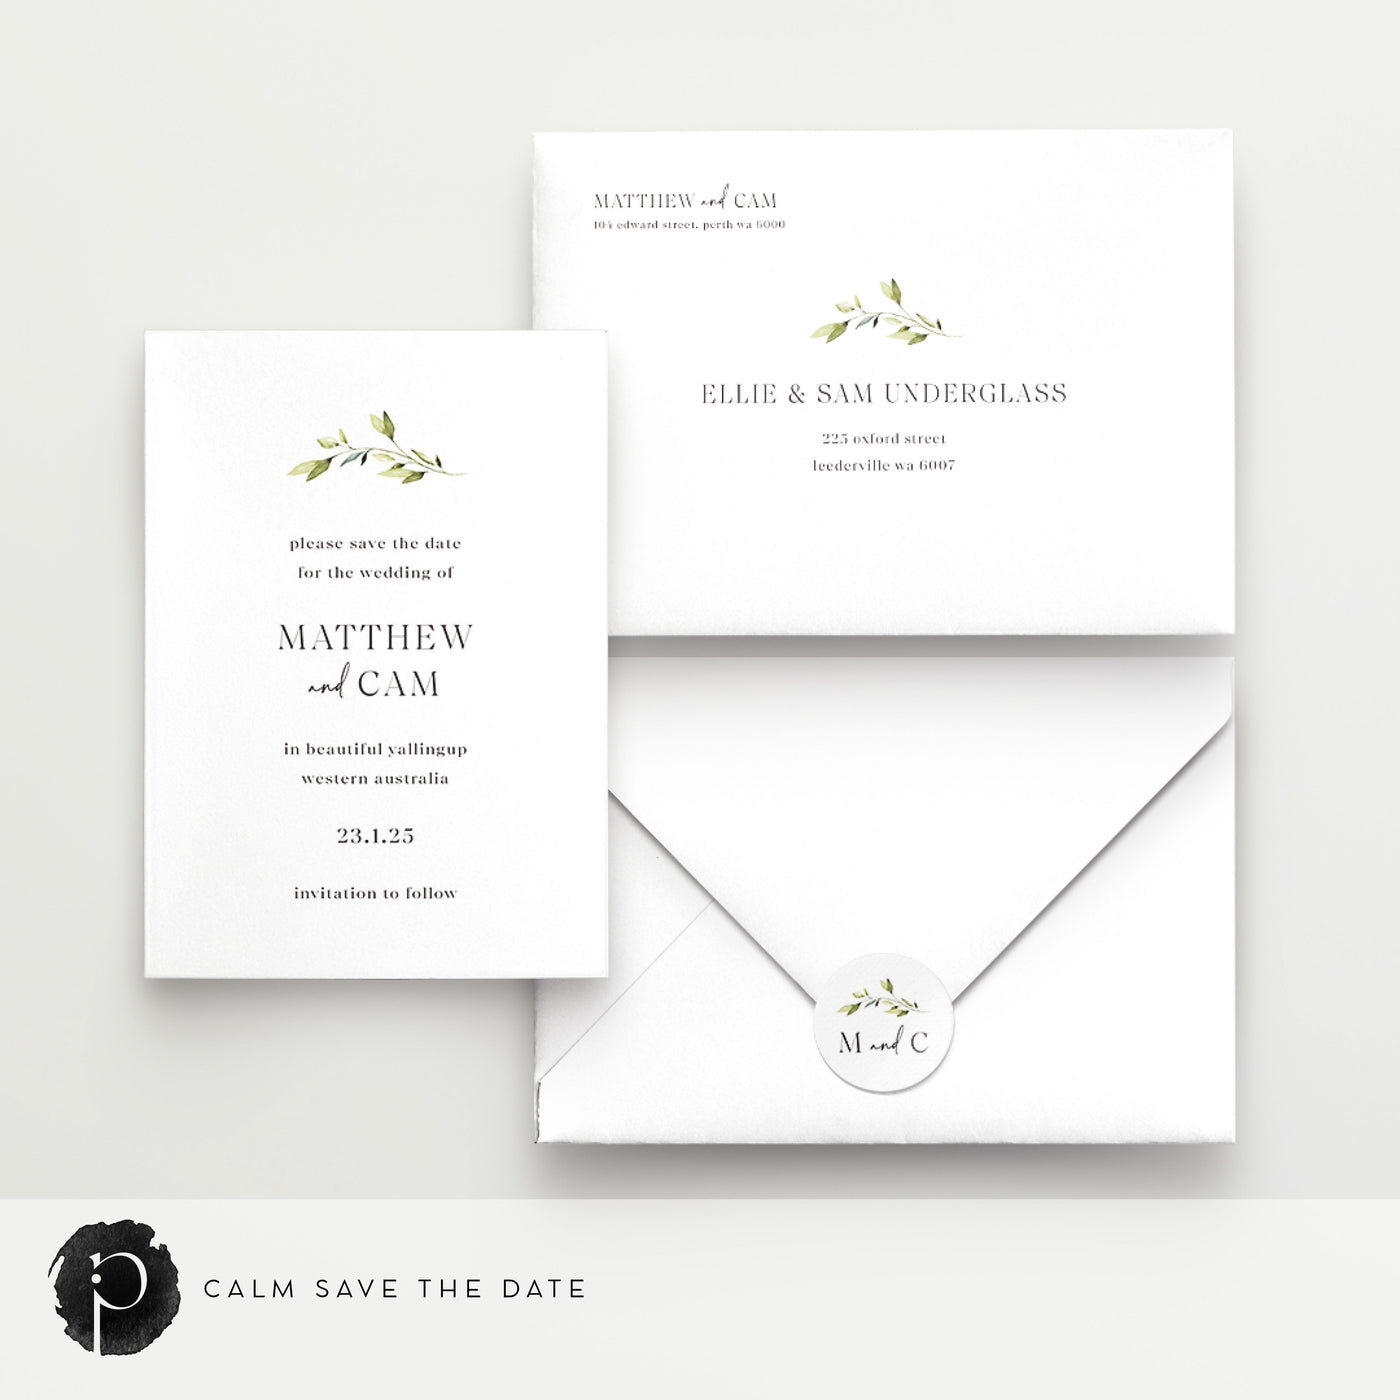 Calm - Save The Date Cards